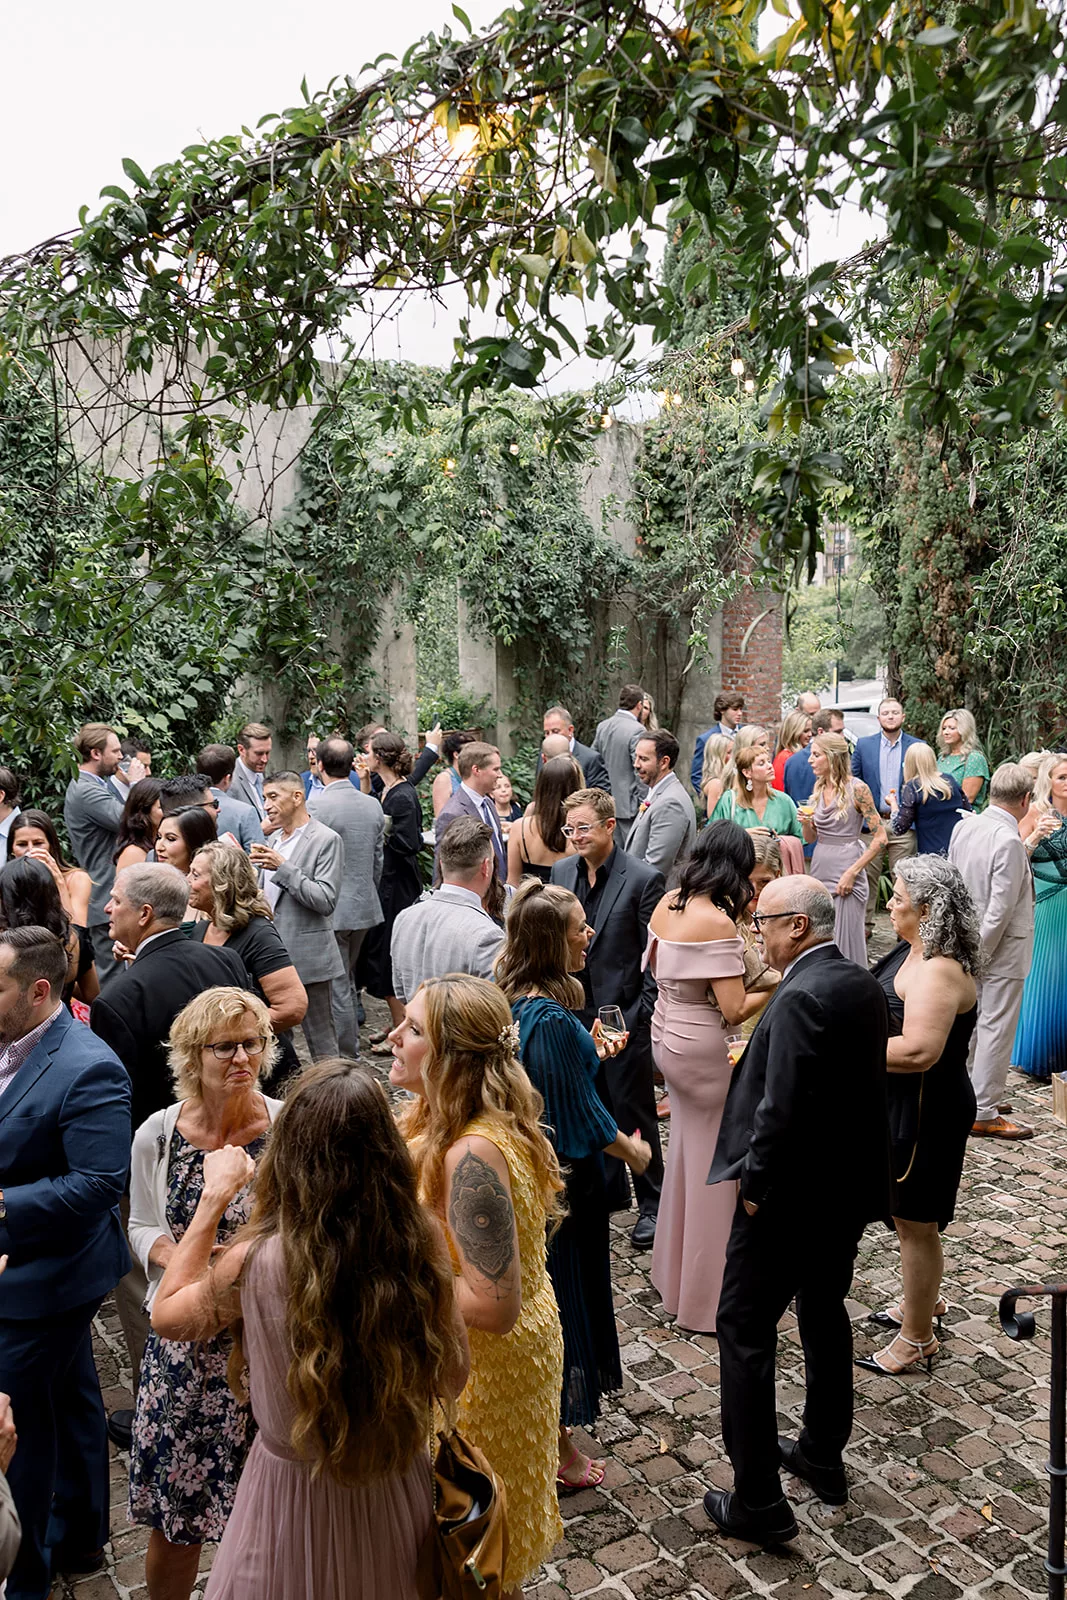 An overhead view of a a wedding cocktail hour on a brick patio at the Summerour Studio Wedding venue